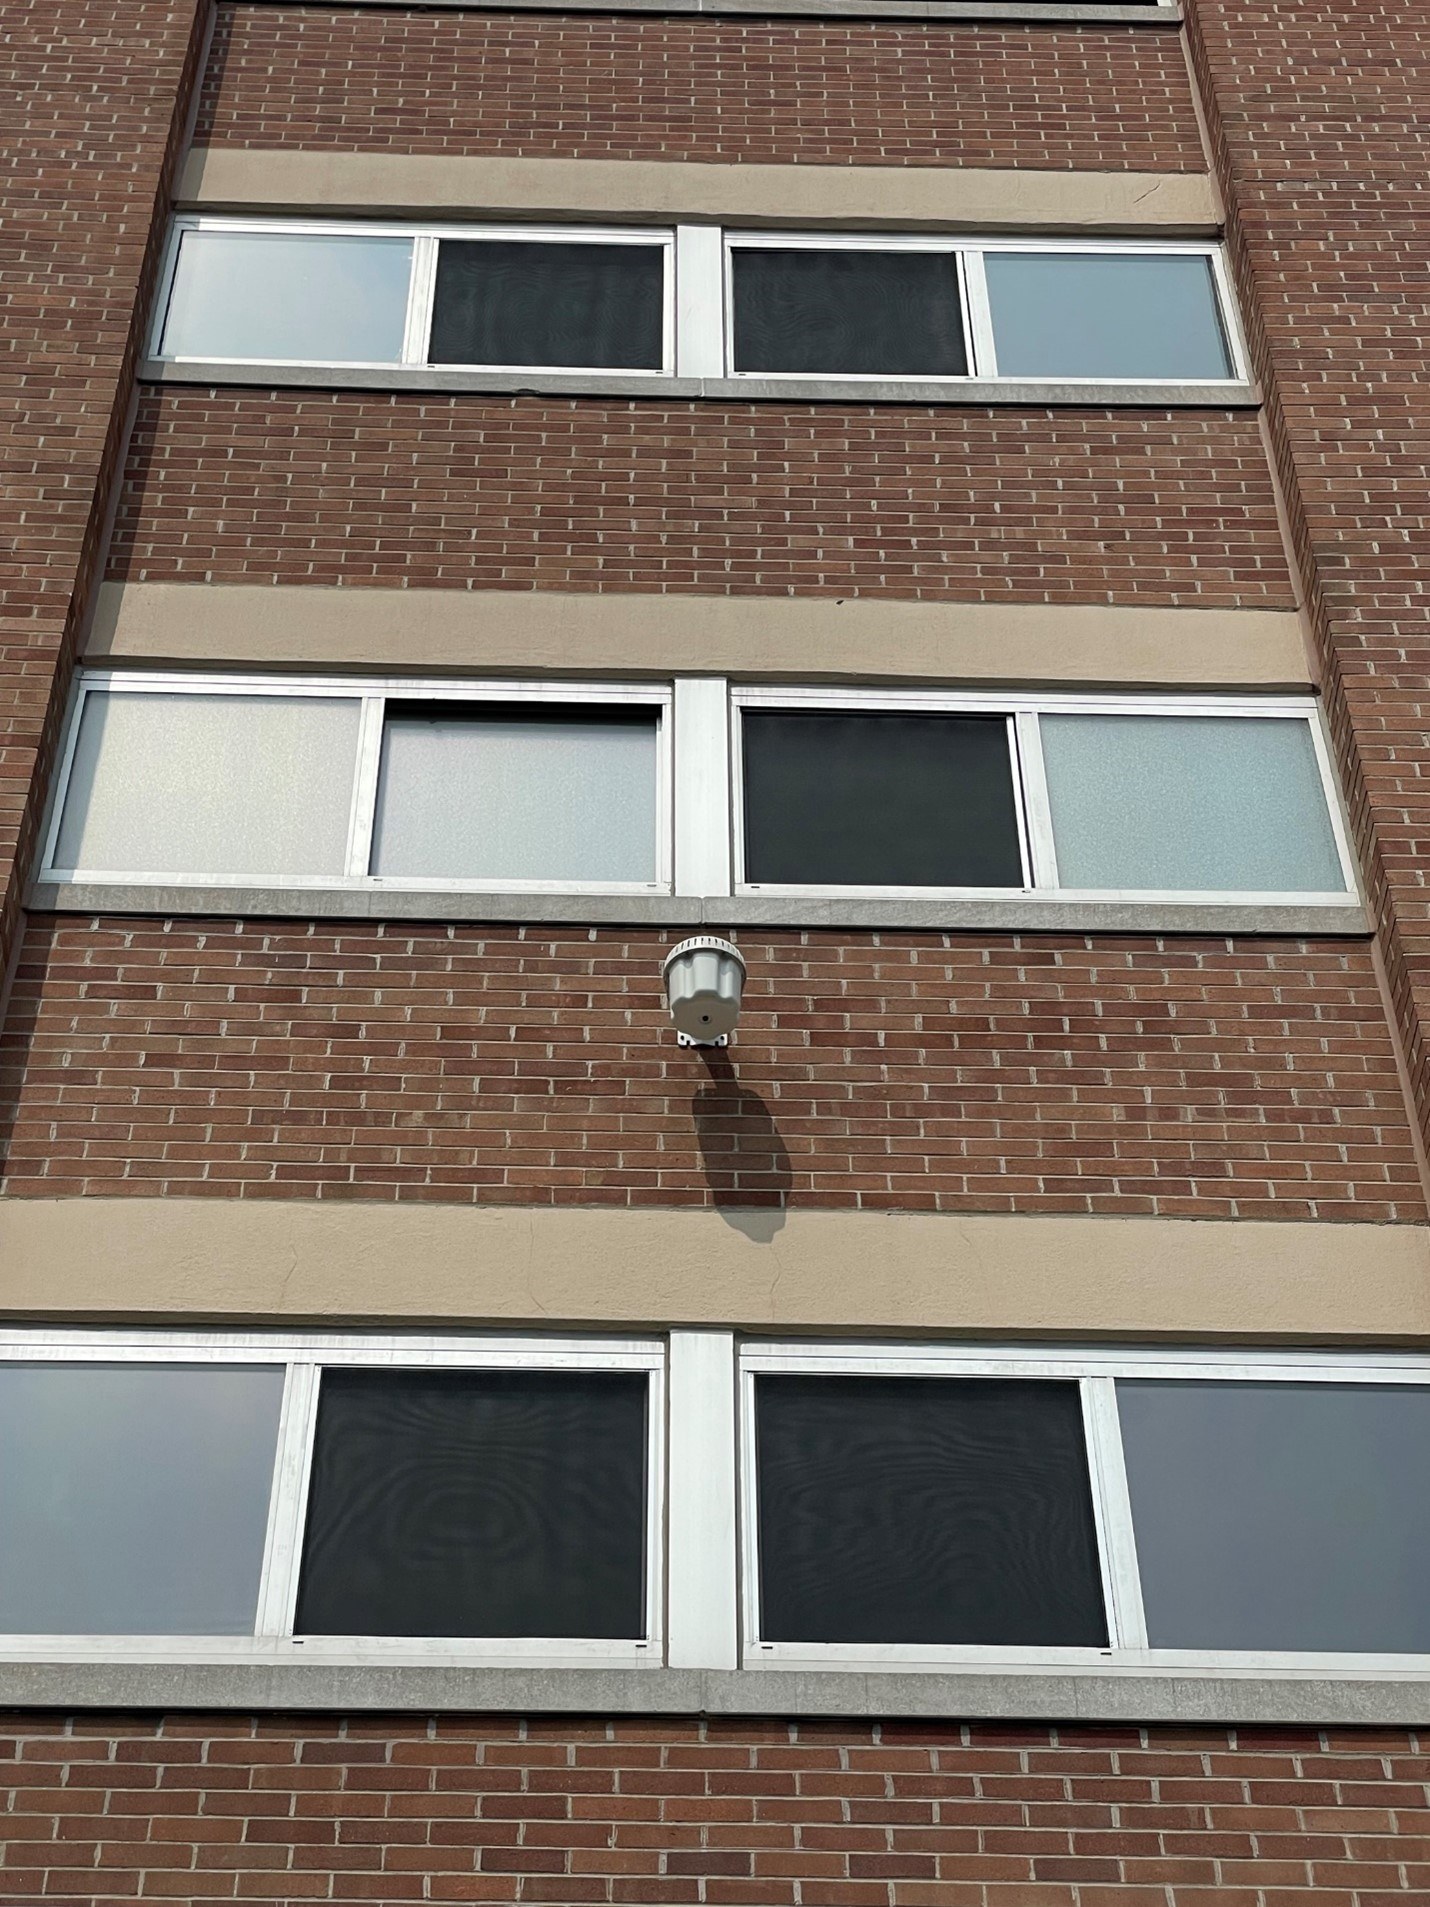 outdoor wireless access point on brown brick building